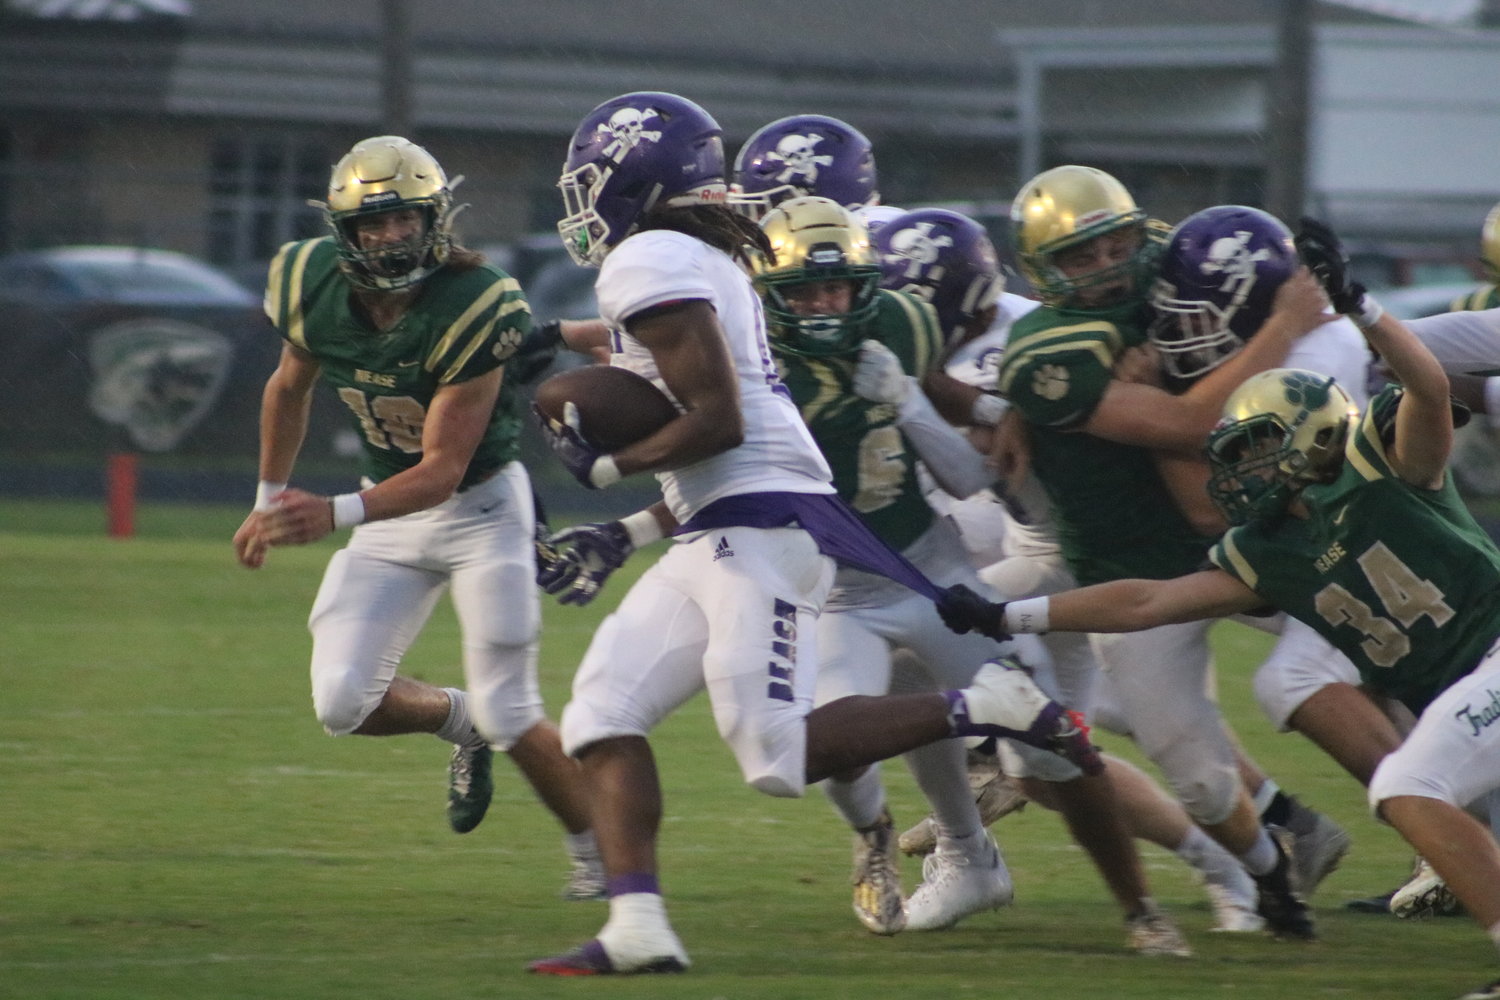 The Nease defense shutout Fletcher in the second half.